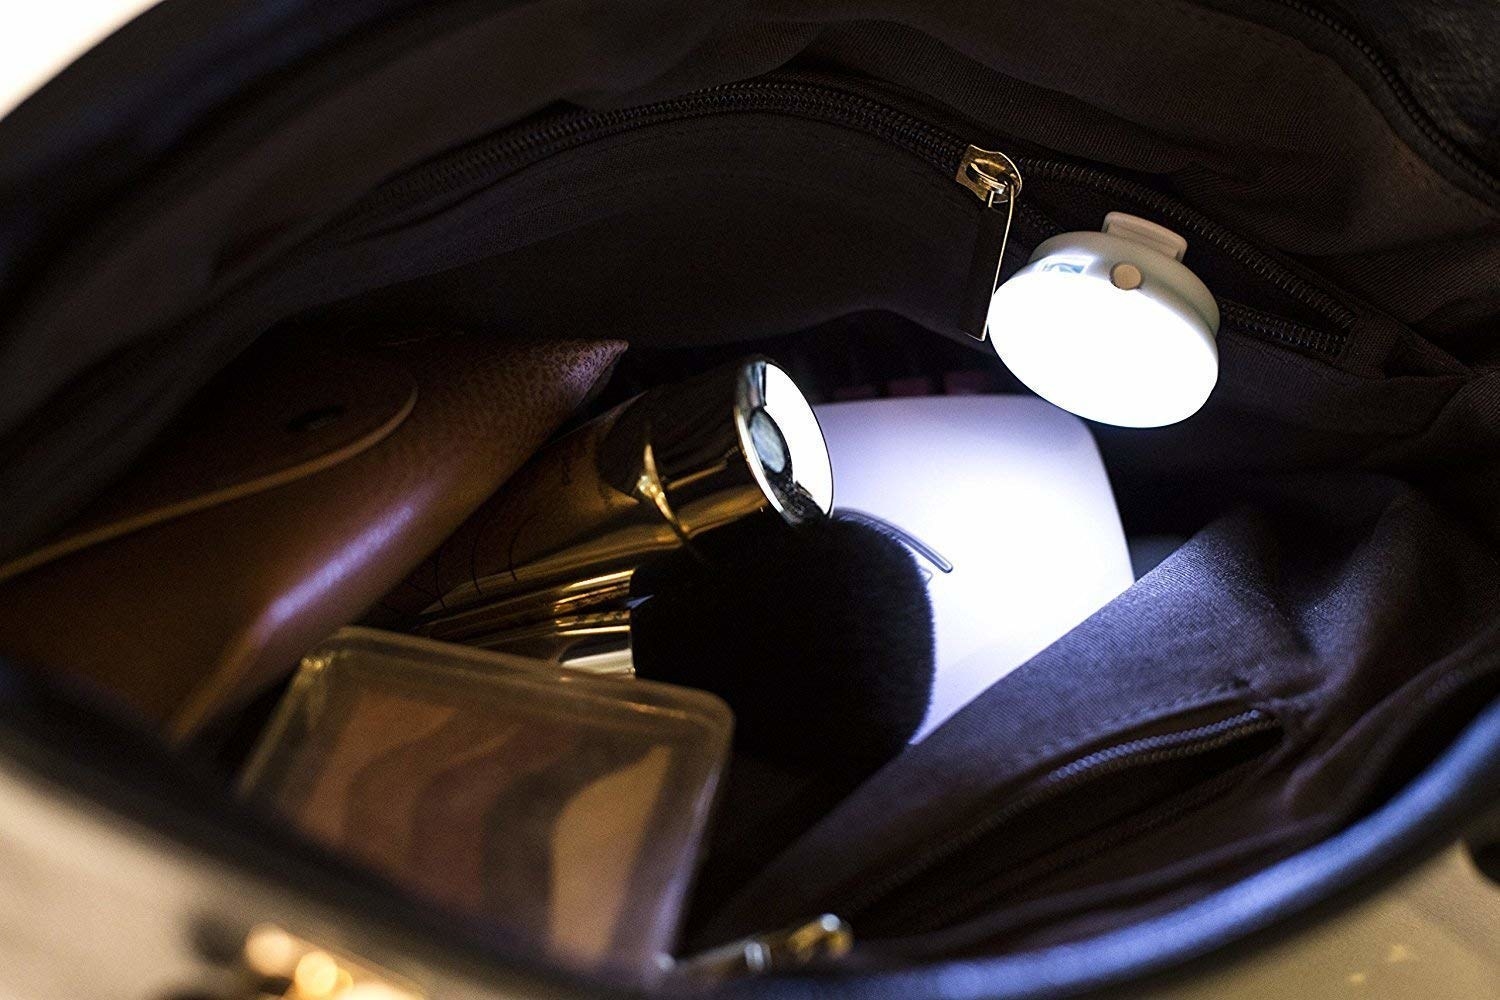 the little light lit up inside a purse to show contents